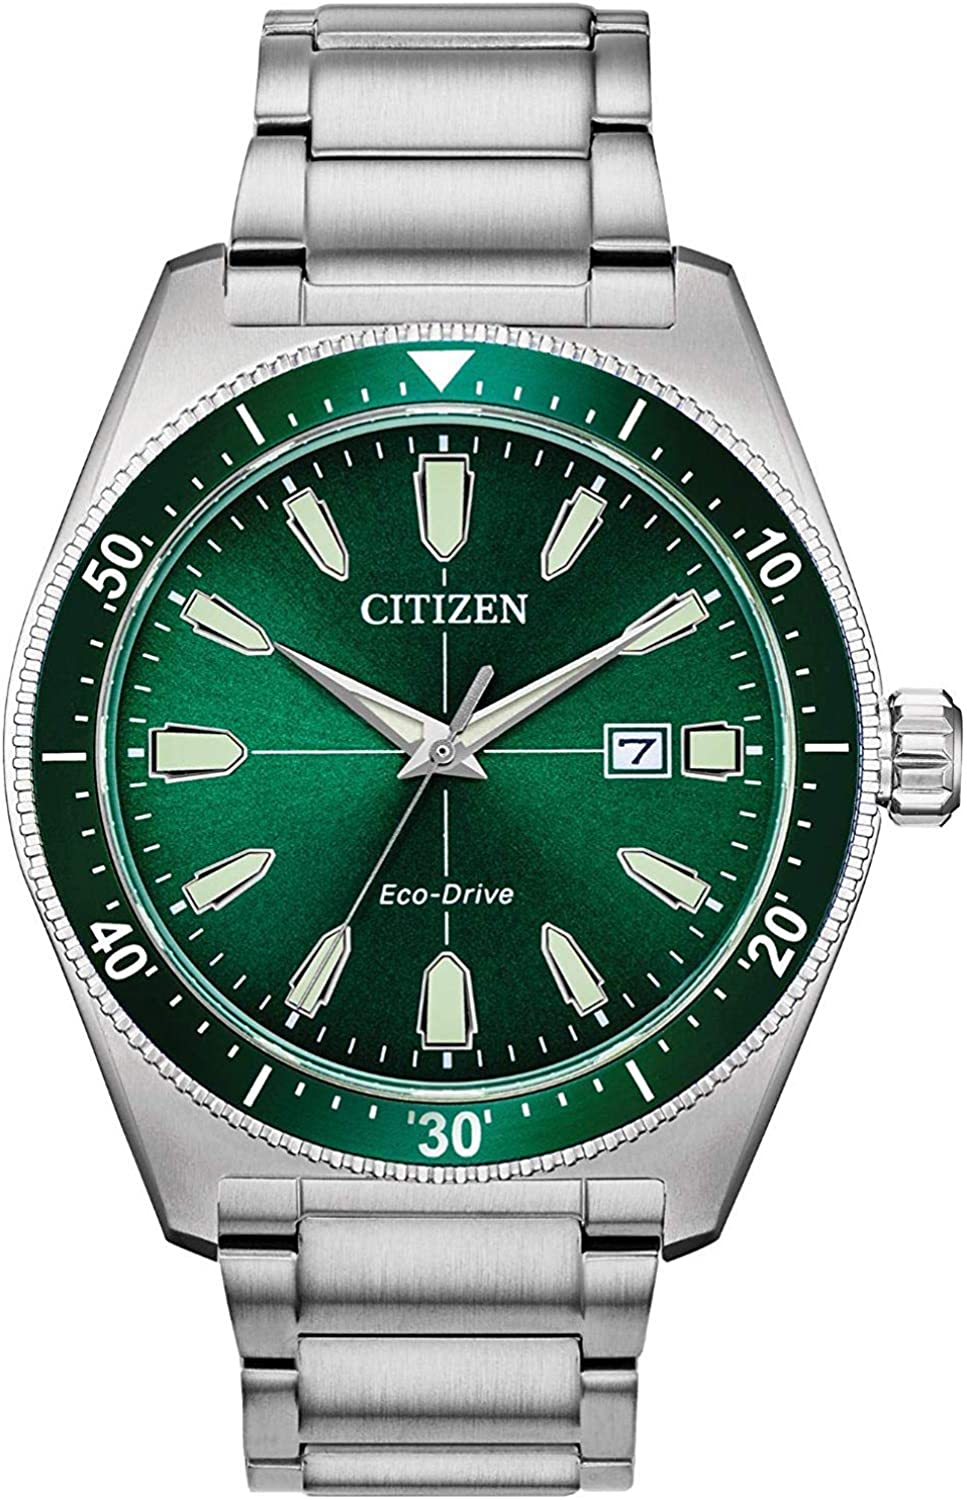 Citizen Eco Drive Silver Tone Watch with Green Face